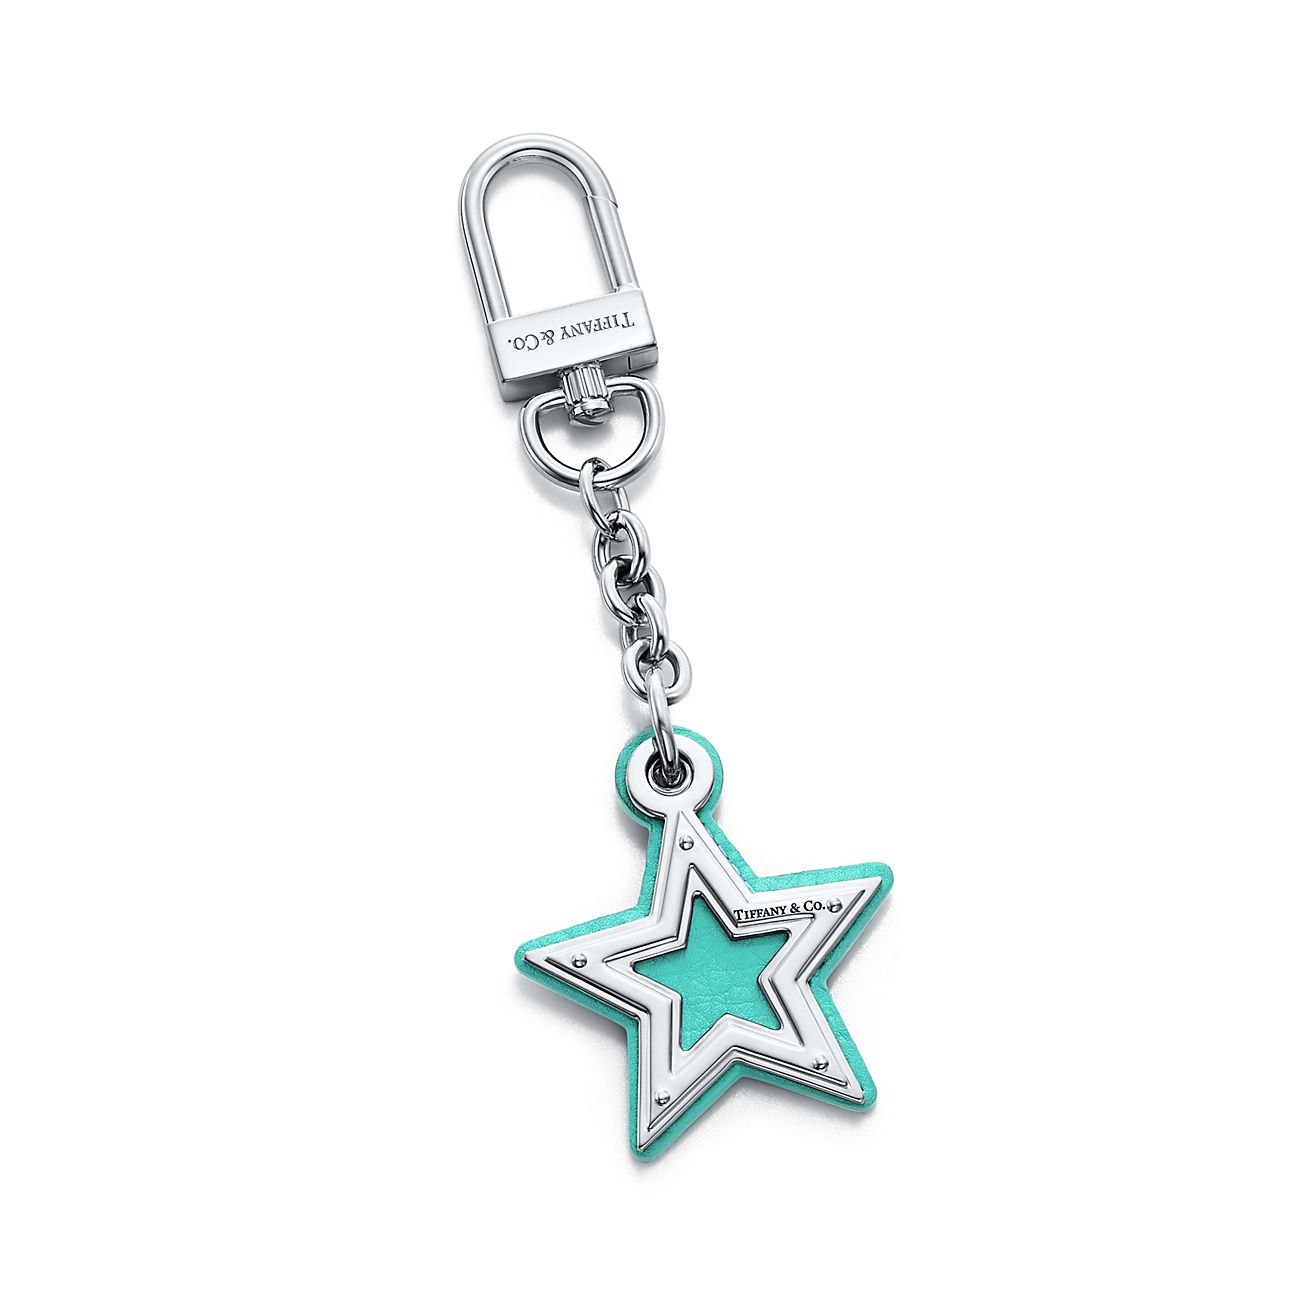 Star bag charm in sterling silver and 